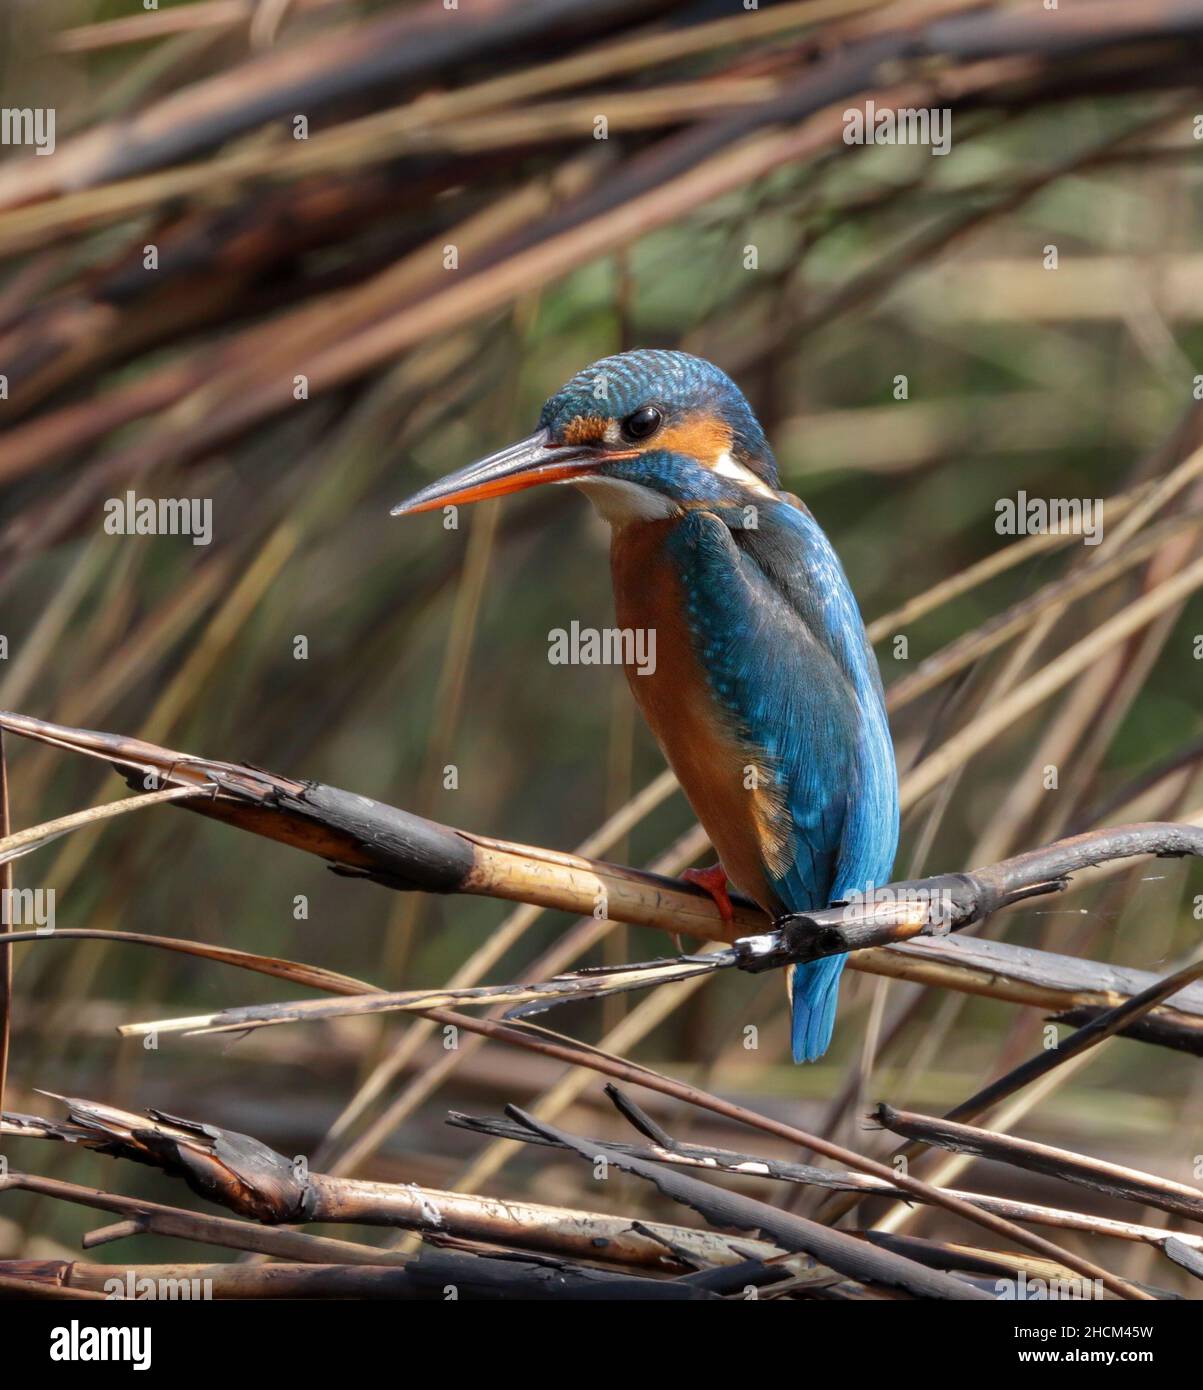 The common kingfisher, also known as the Eurasian kingfisher and river kingfisher, is a small kingfisher with seven subspecies recognized within its w Stock Photo